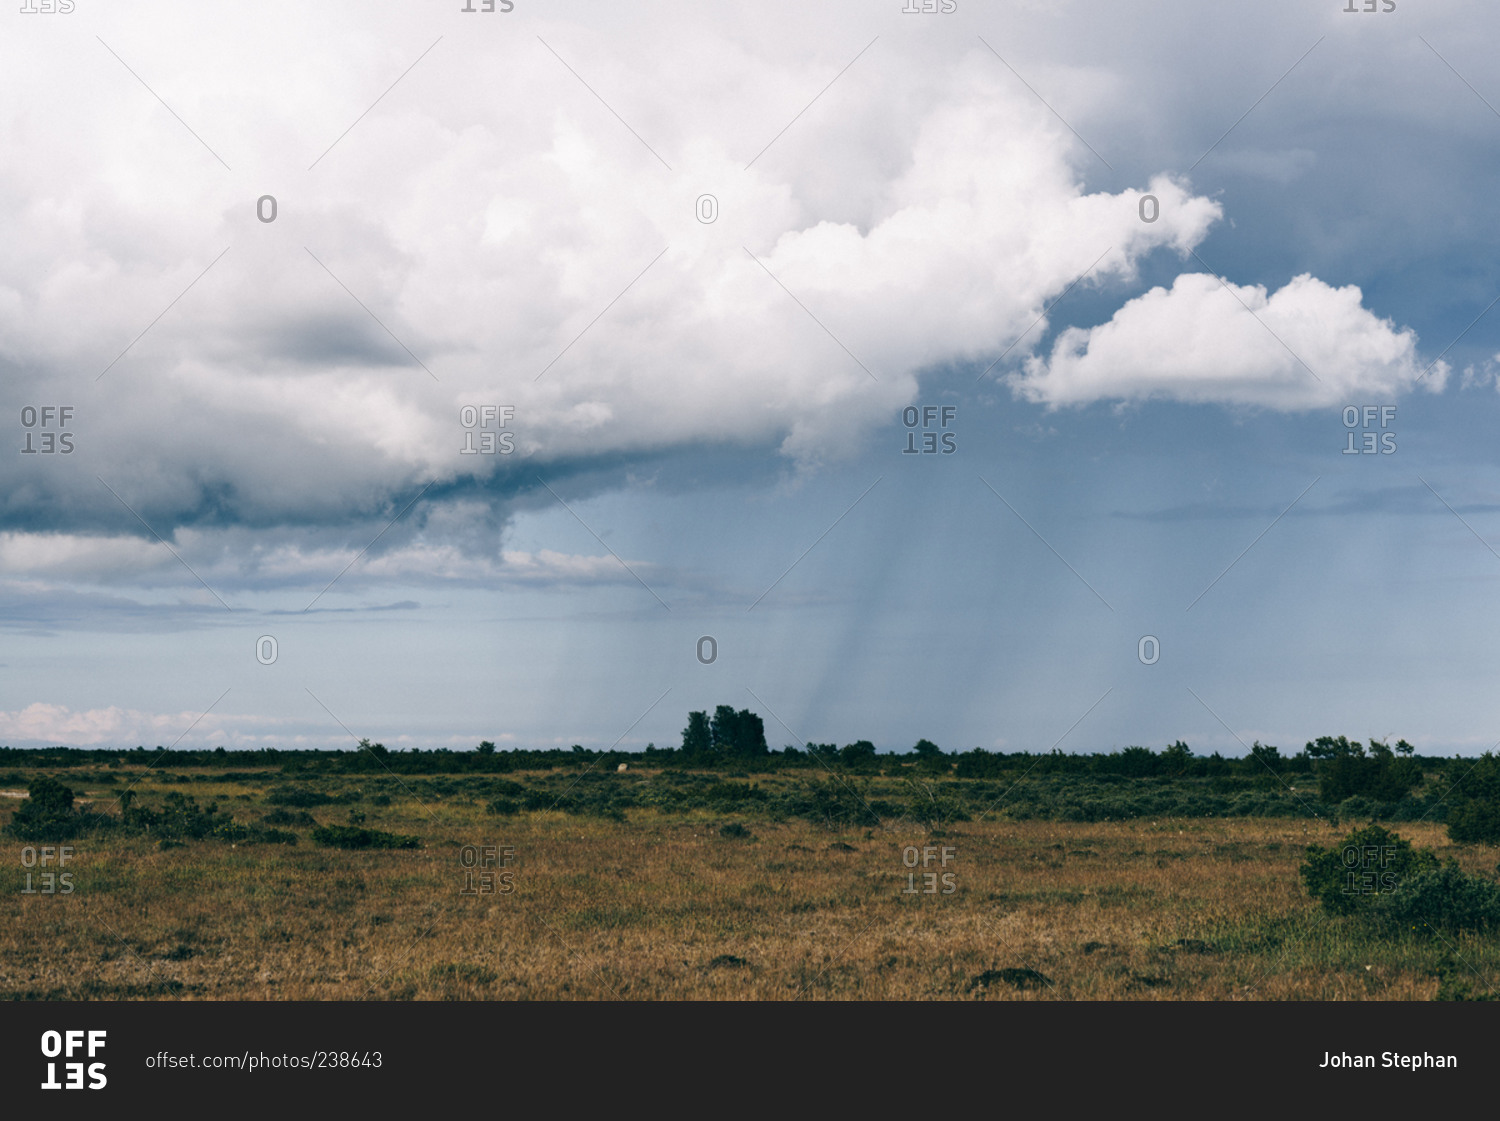 Oland, Sweden landscape with rain storm in distance